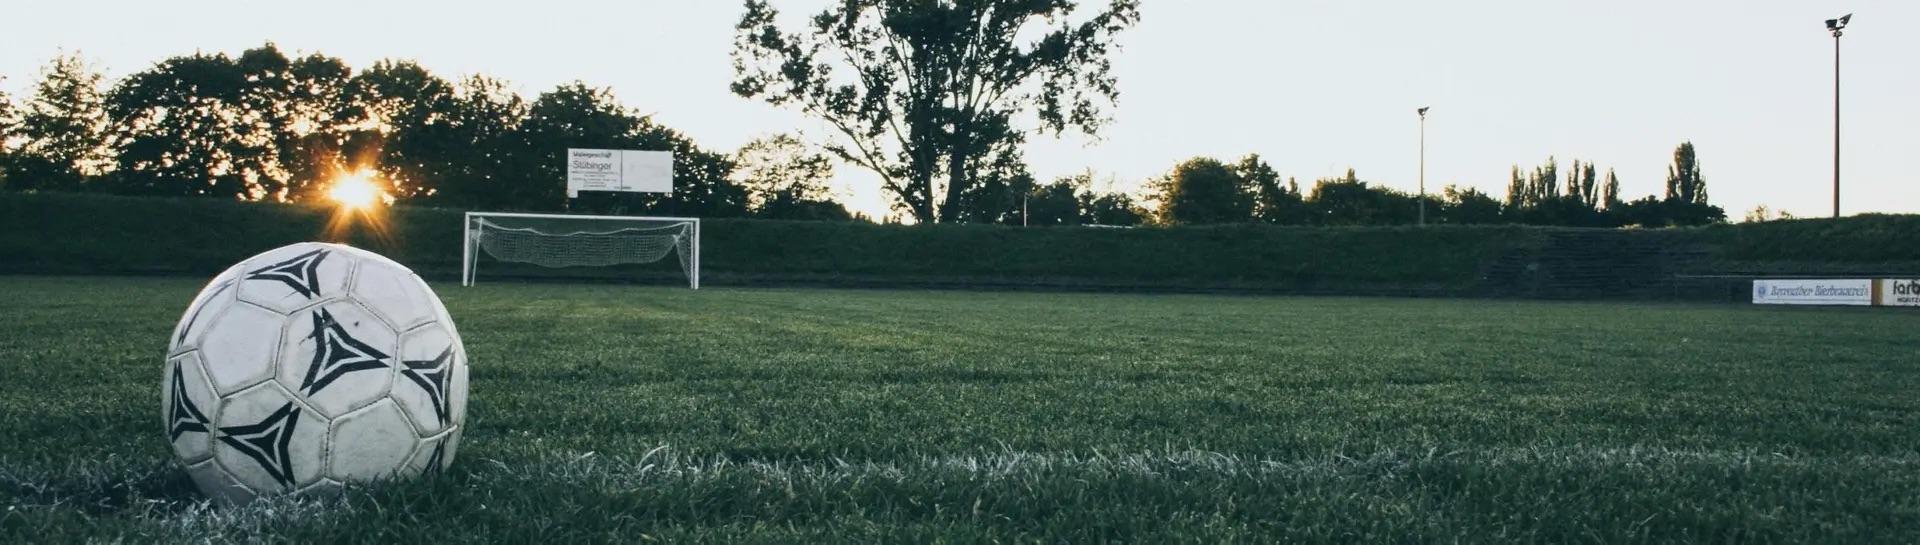 empty field with a soccer ball